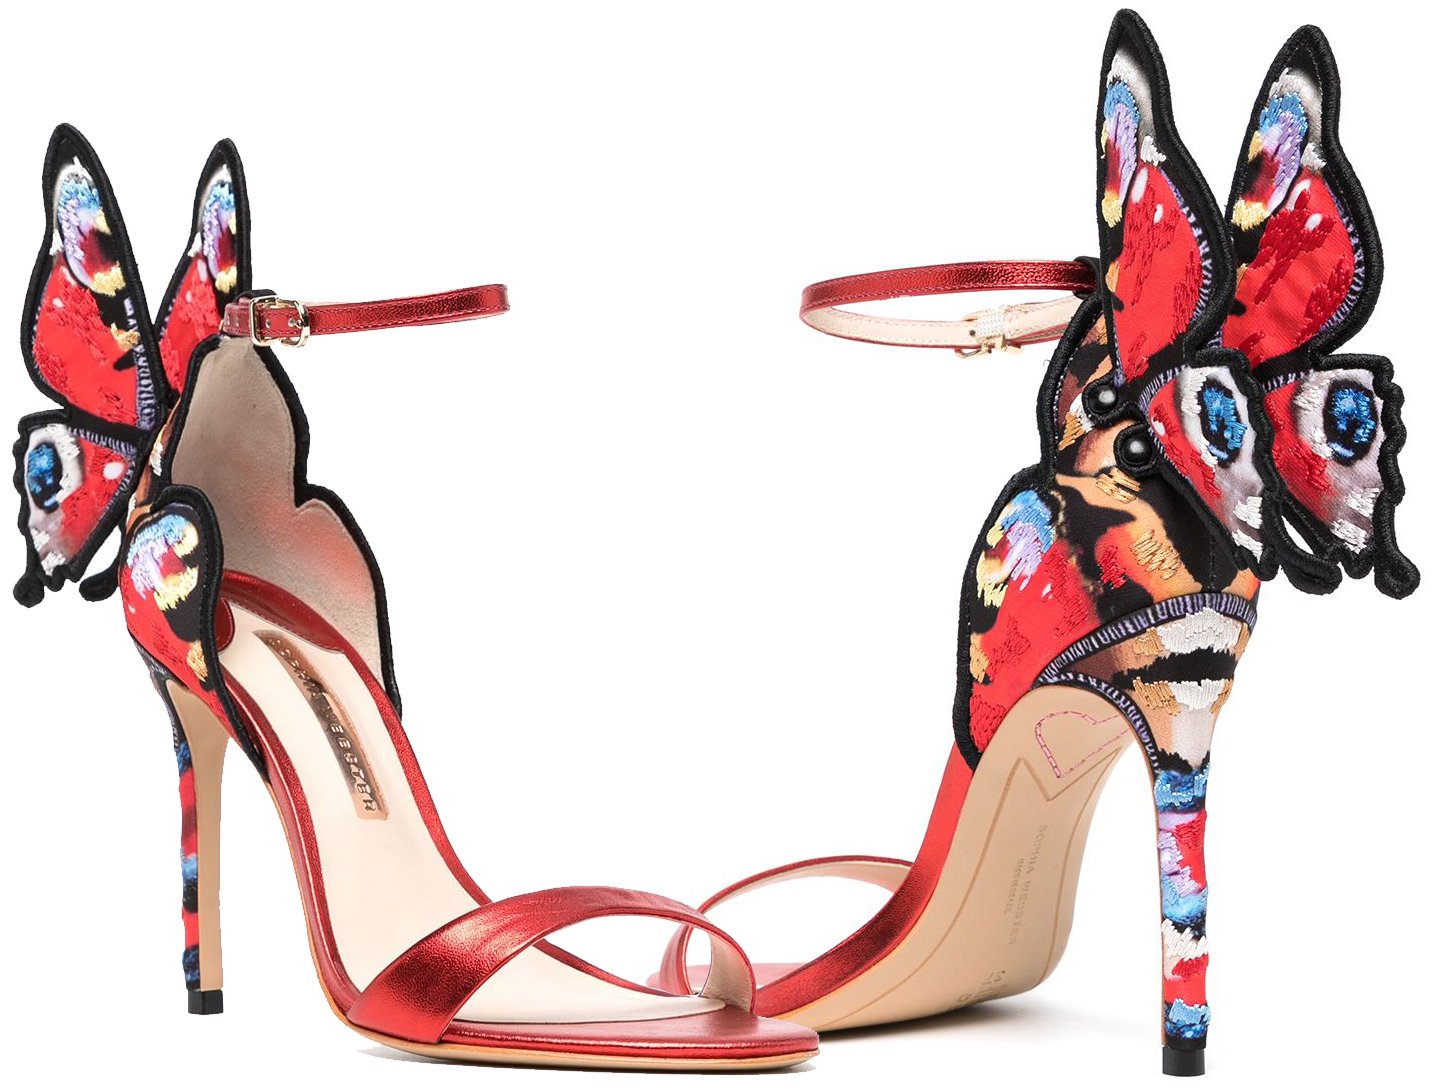 The iconic Chiara sandals are given an update inspired by the Red Peacock butterfly